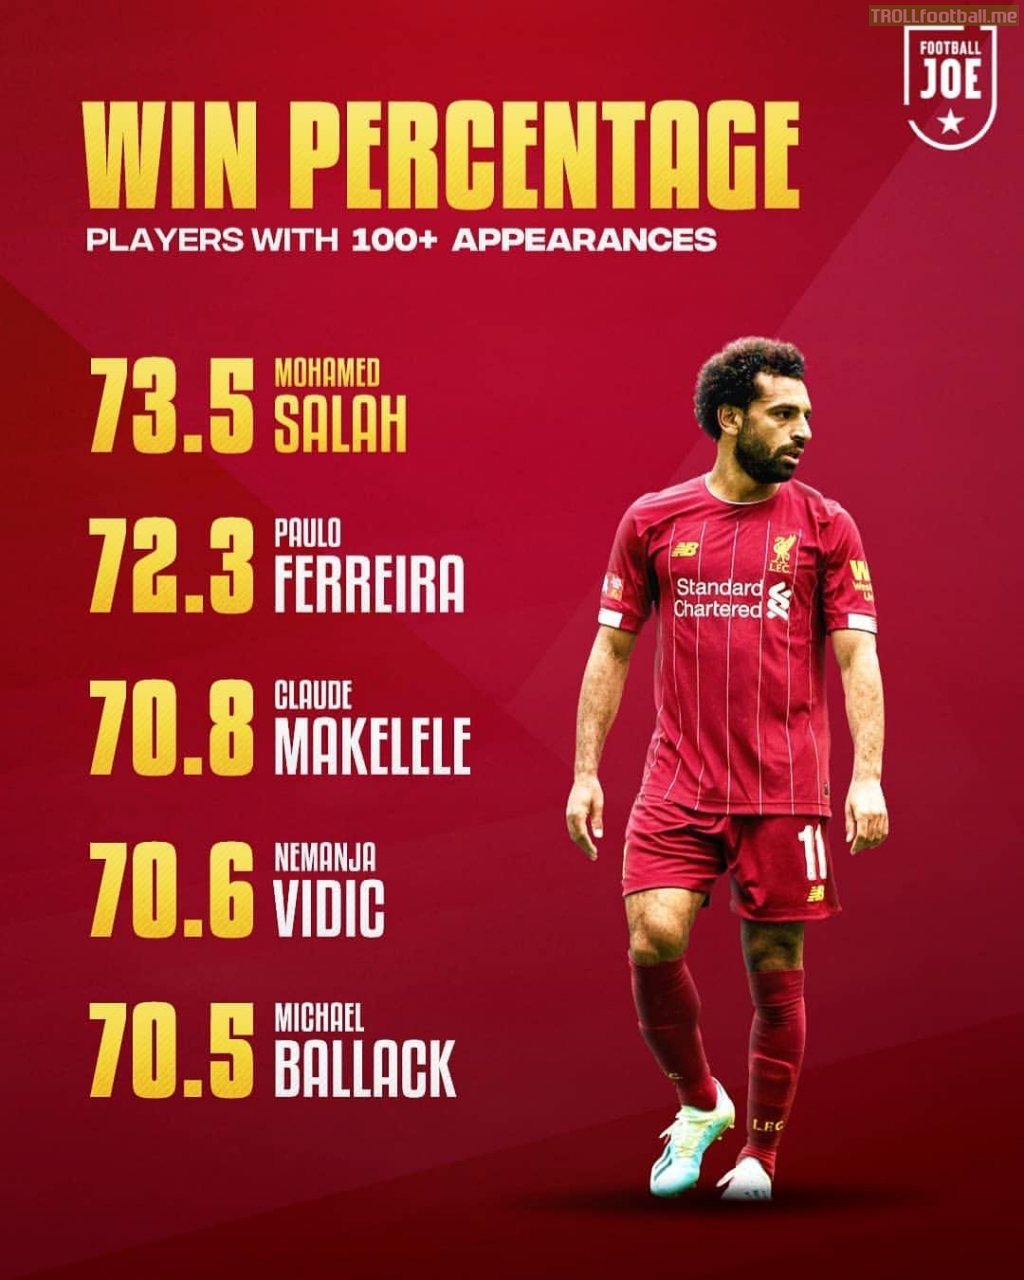 Mohamed Salah currently has the highest Premier League win percentage of any player with 100+ appearances